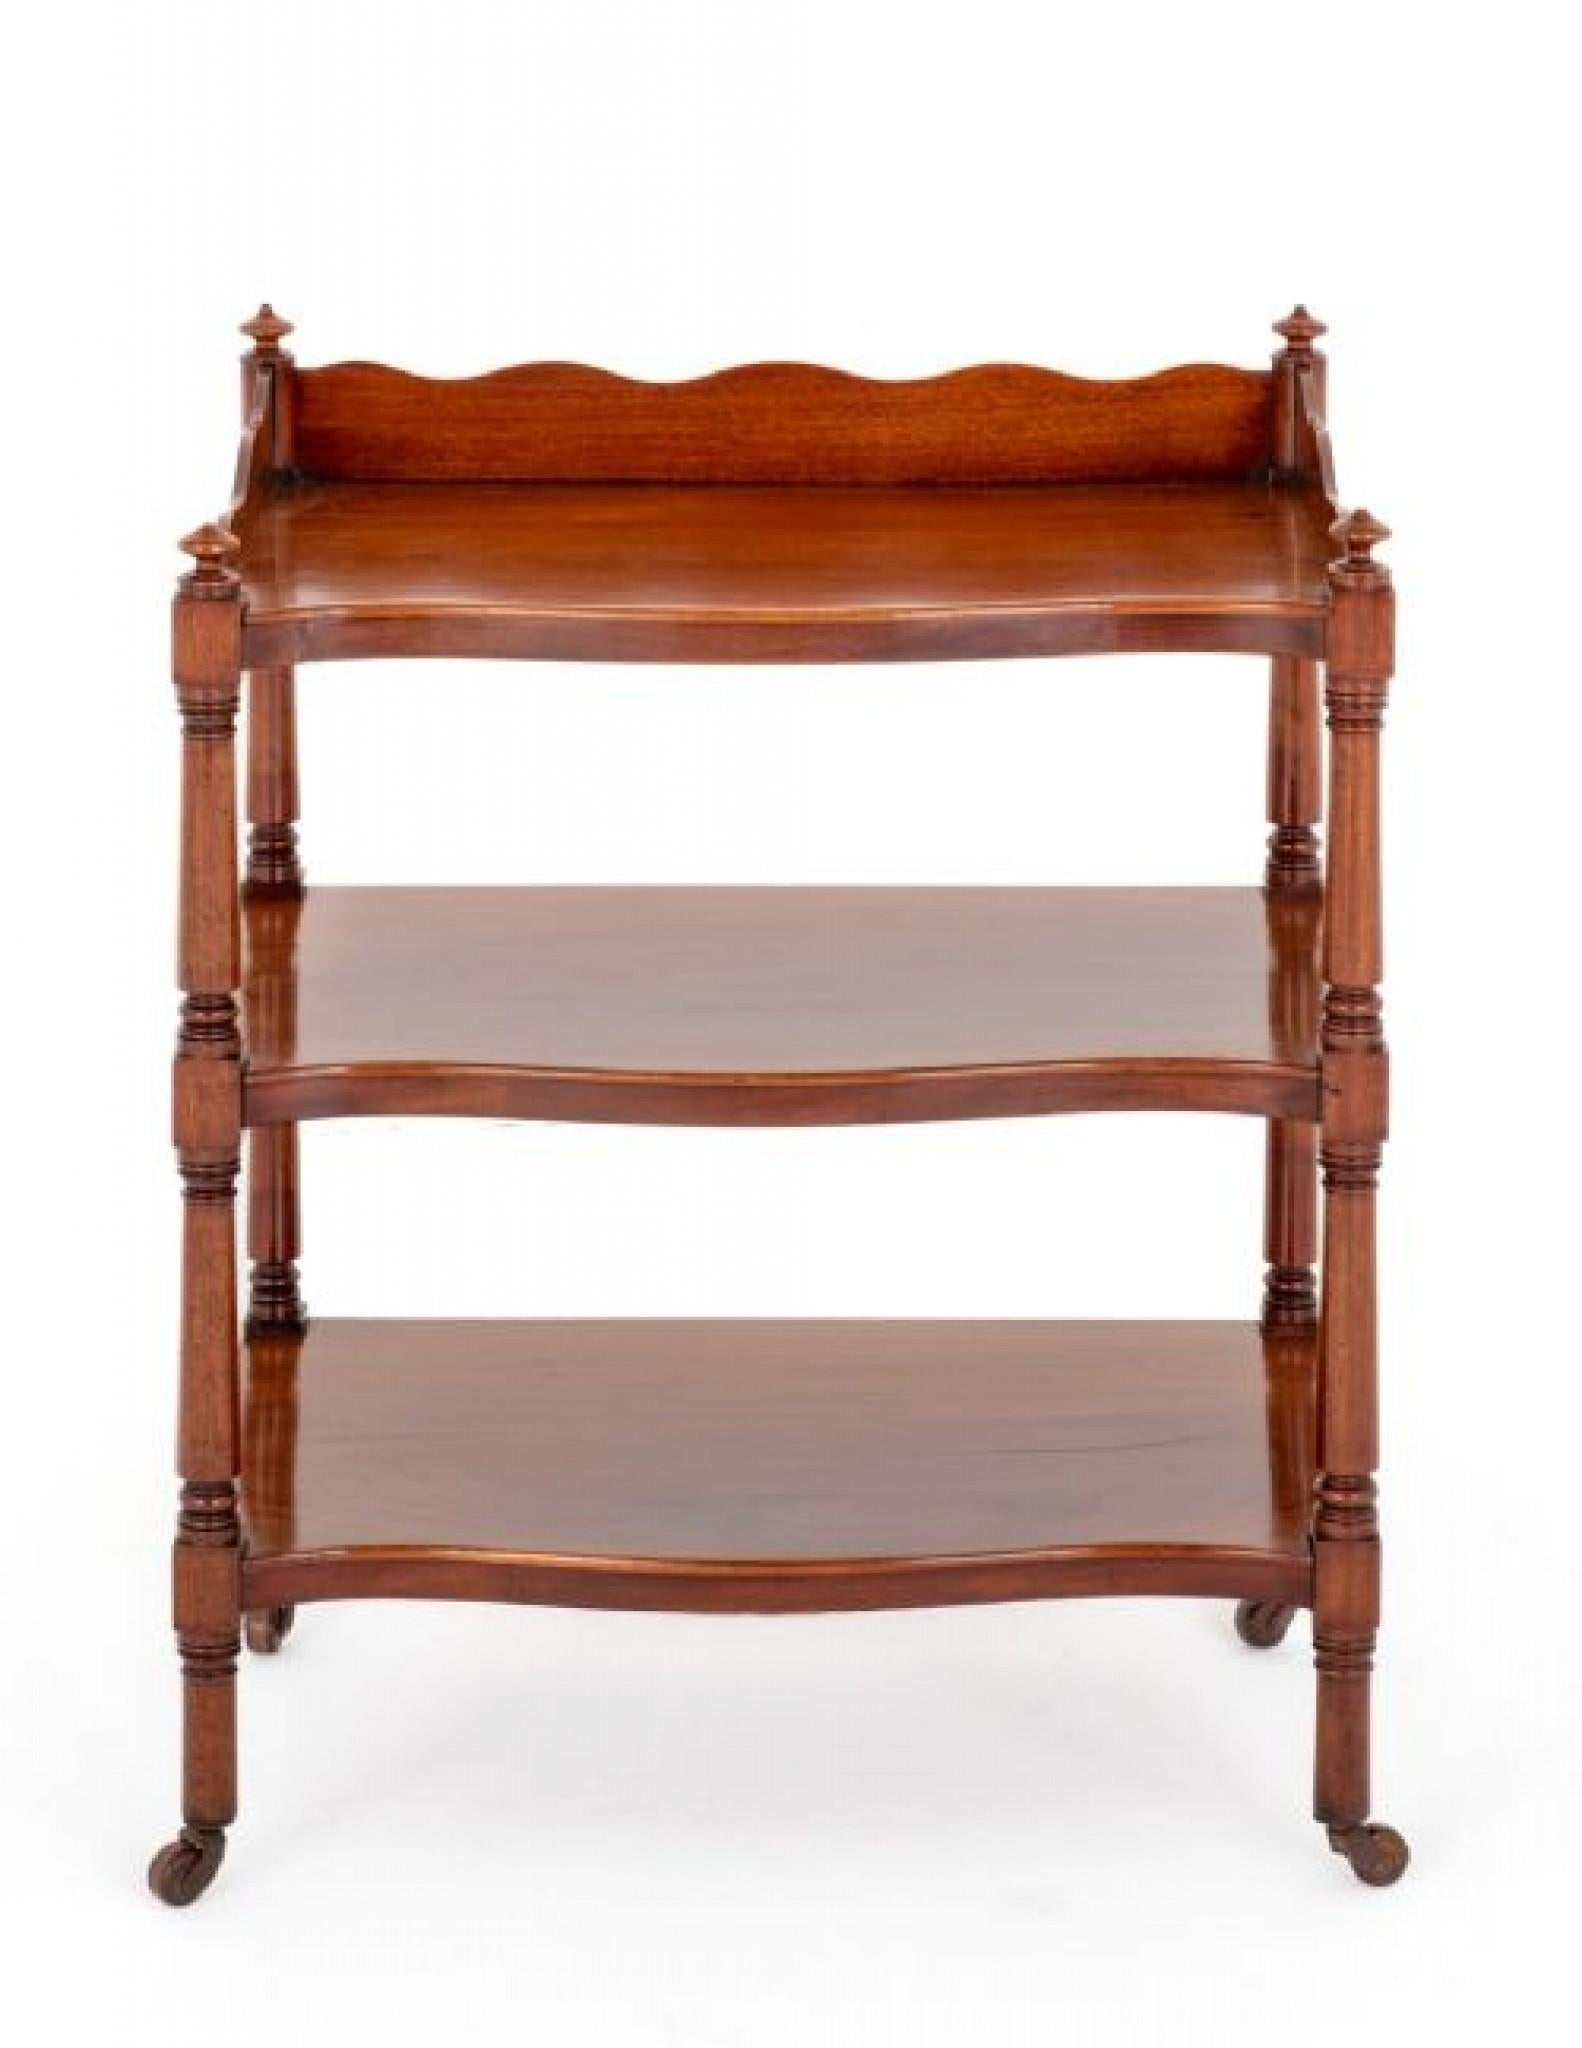 Victorian Whatnot Bookshelf Mahogany Shelf Period In Good Condition For Sale In Potters Bar, GB